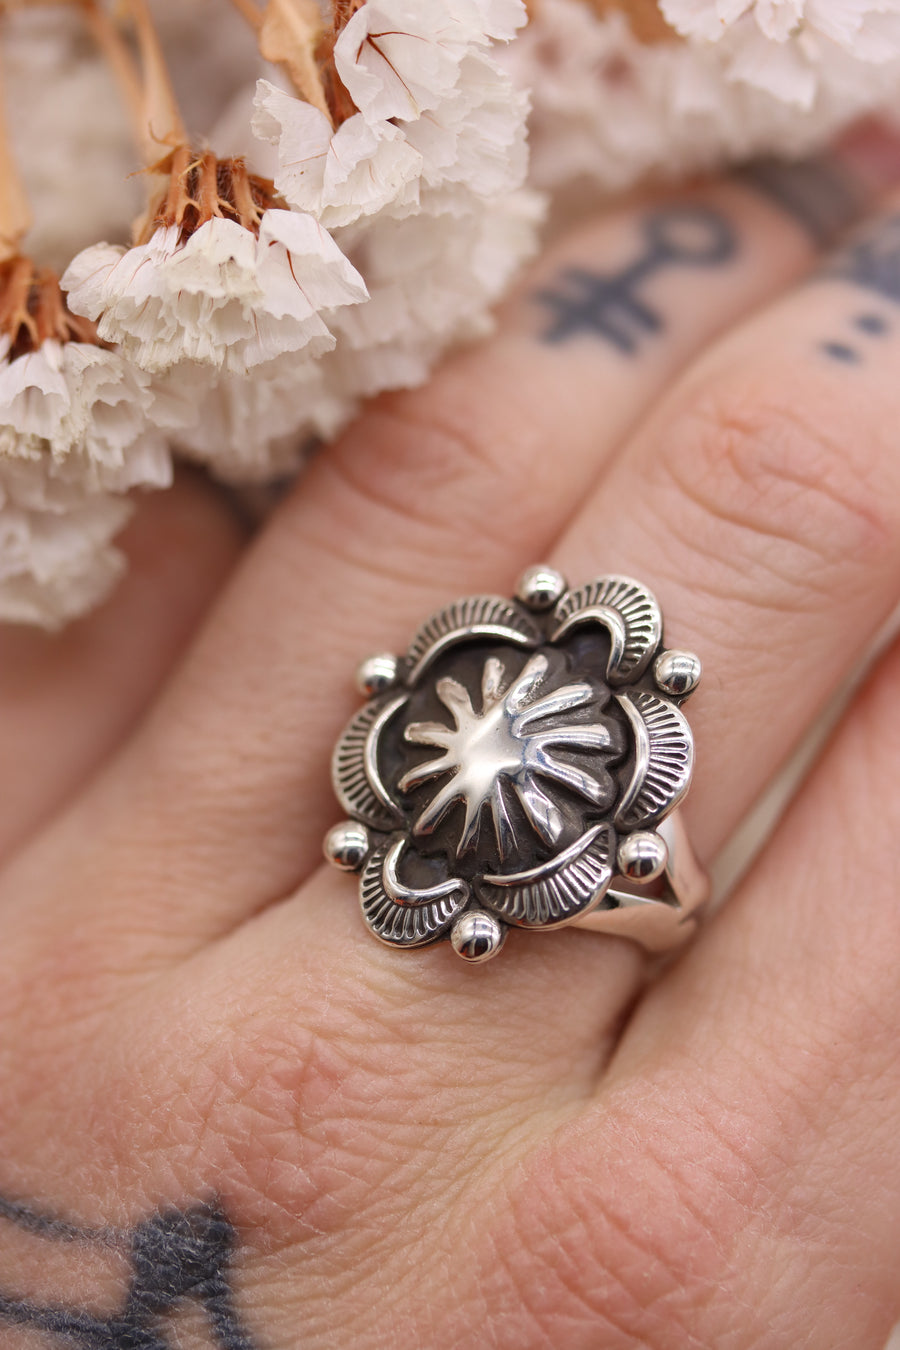 The Celestial Ring (size 7.5)